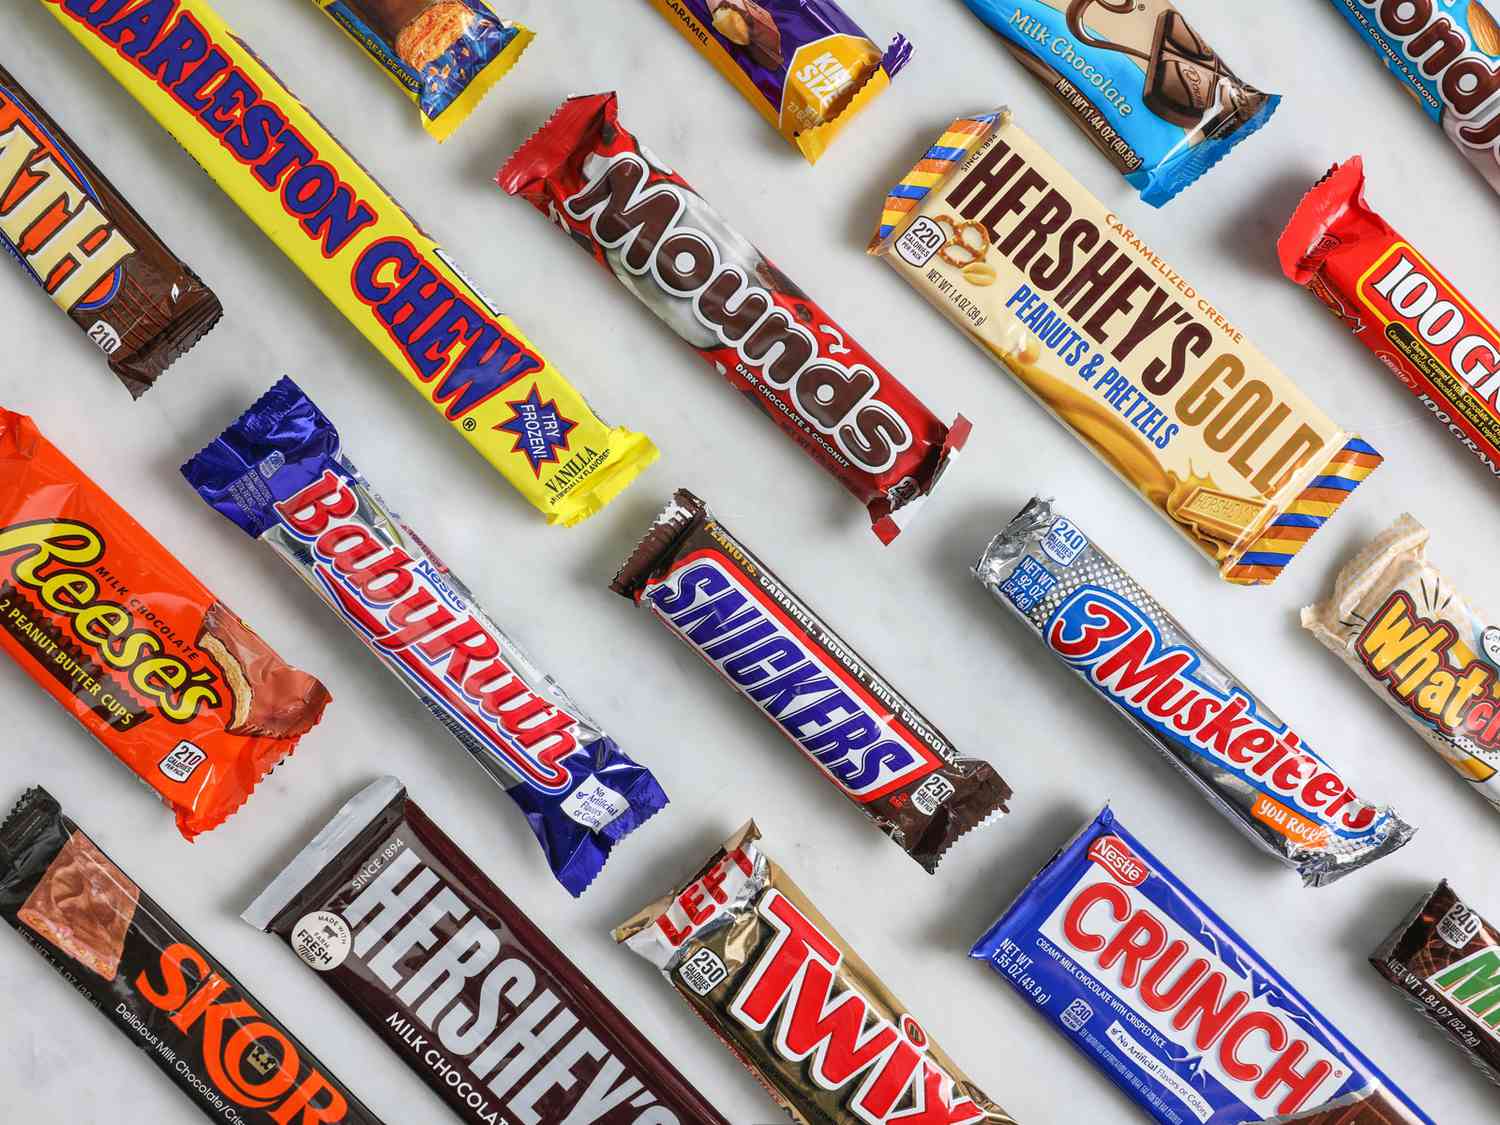 American candy bars. They're downright tiny now and cost 2-3 times as much as they did 10+ years ago. Also, you can tell the manufacturers are using inferior ingredients -- the chocolate is dry and chalky. u/rosesforthemonsters